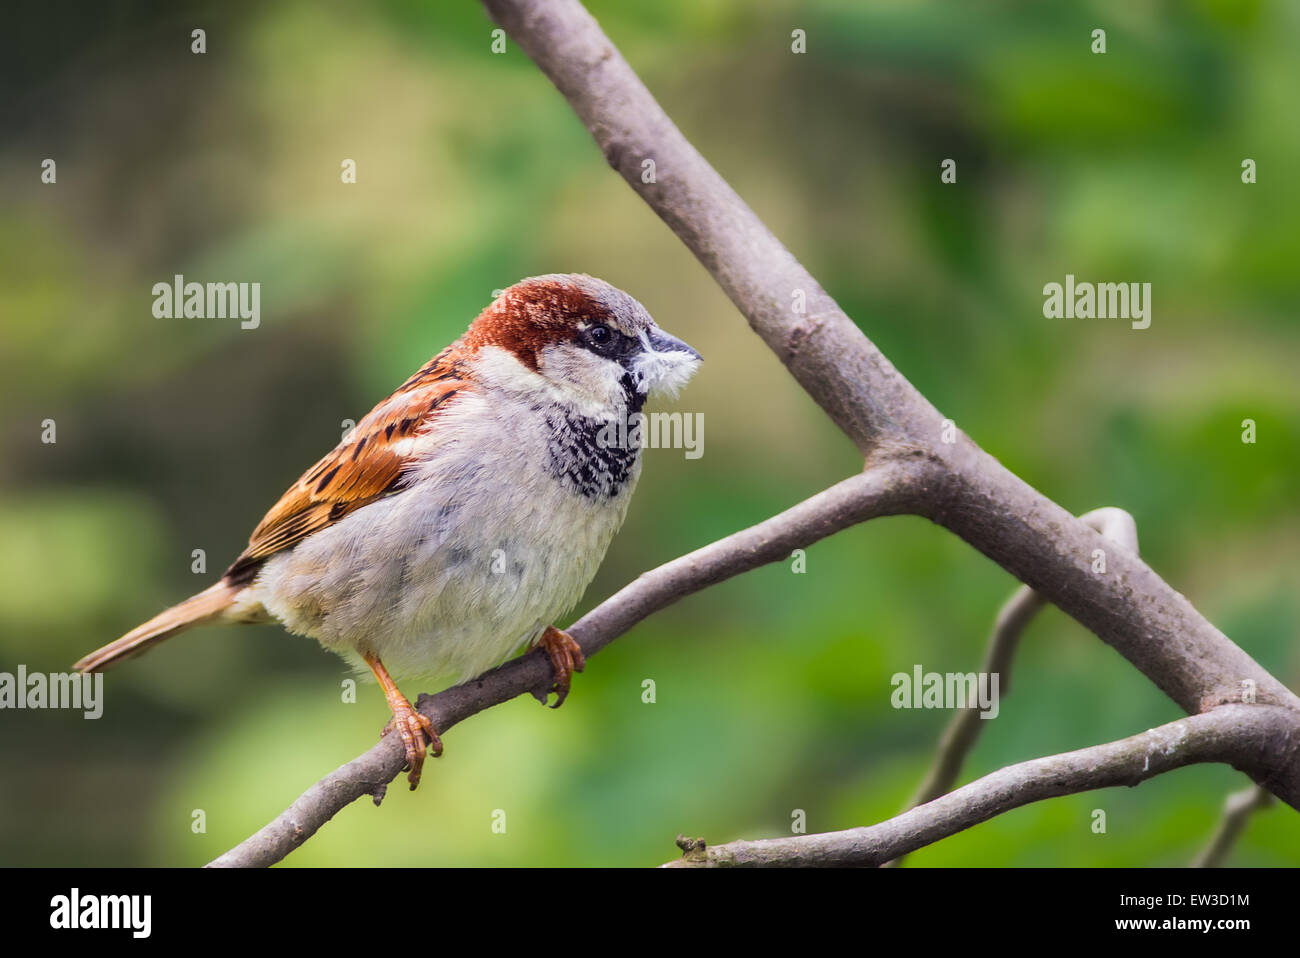 House sparrow (Passer domesticus) holding a piece of fluff in its beak Stock Photo